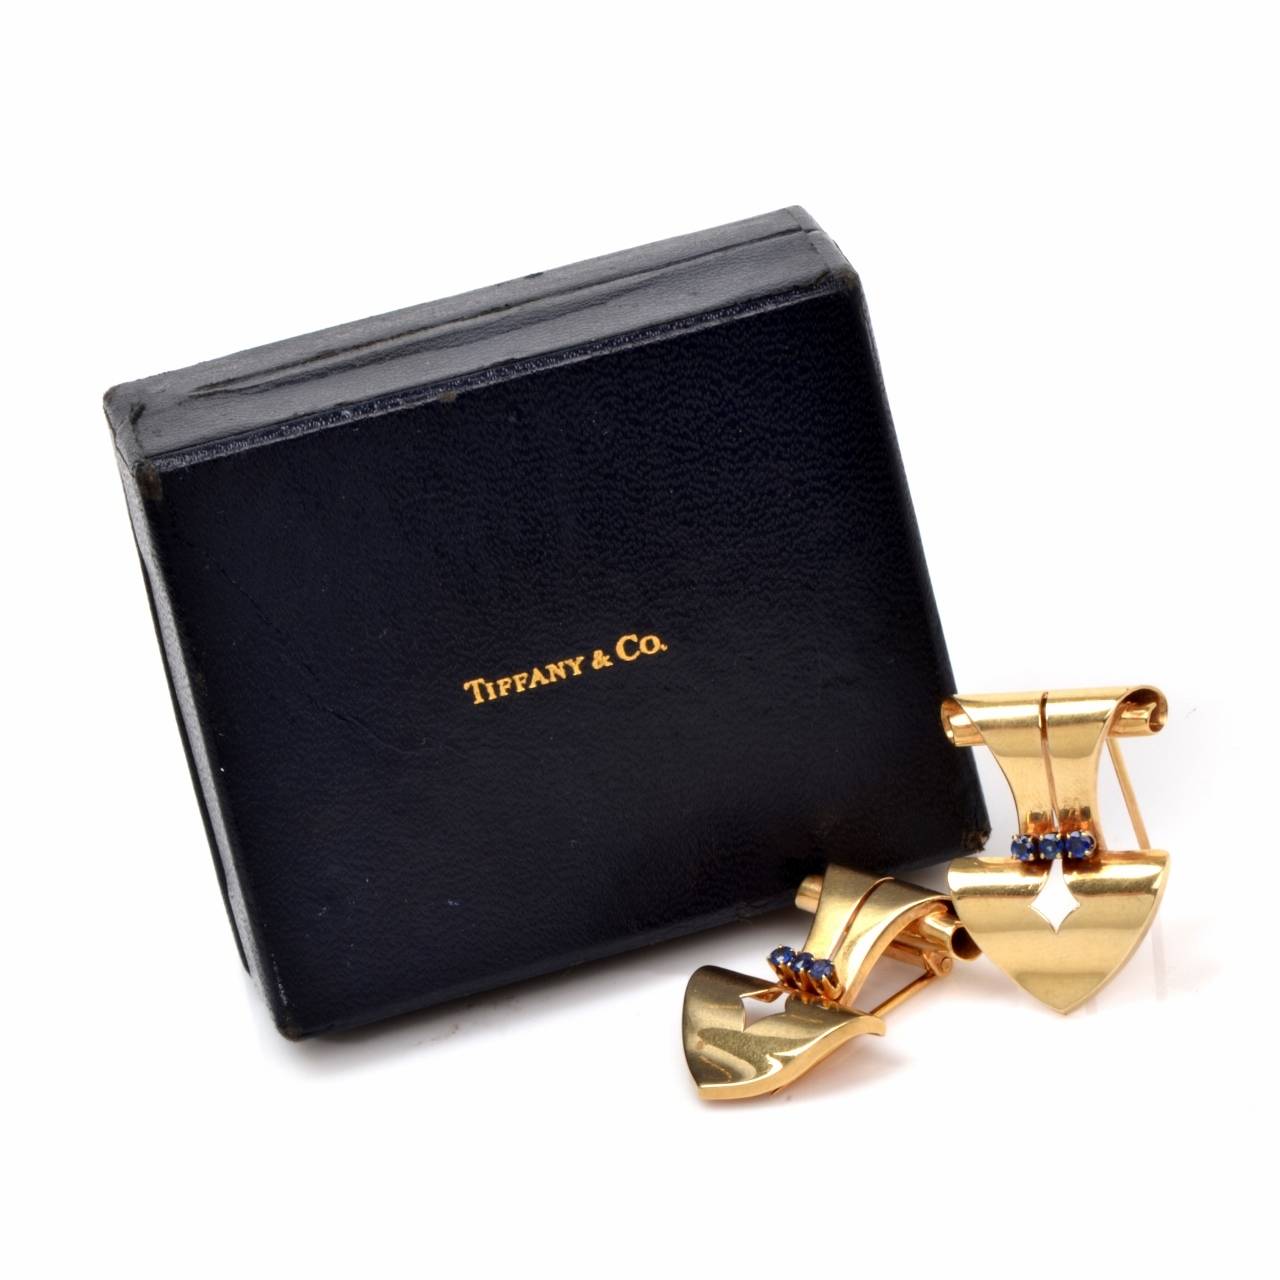 Tiffany & Co. Sapphire Gold Double Lapel Brooches 1